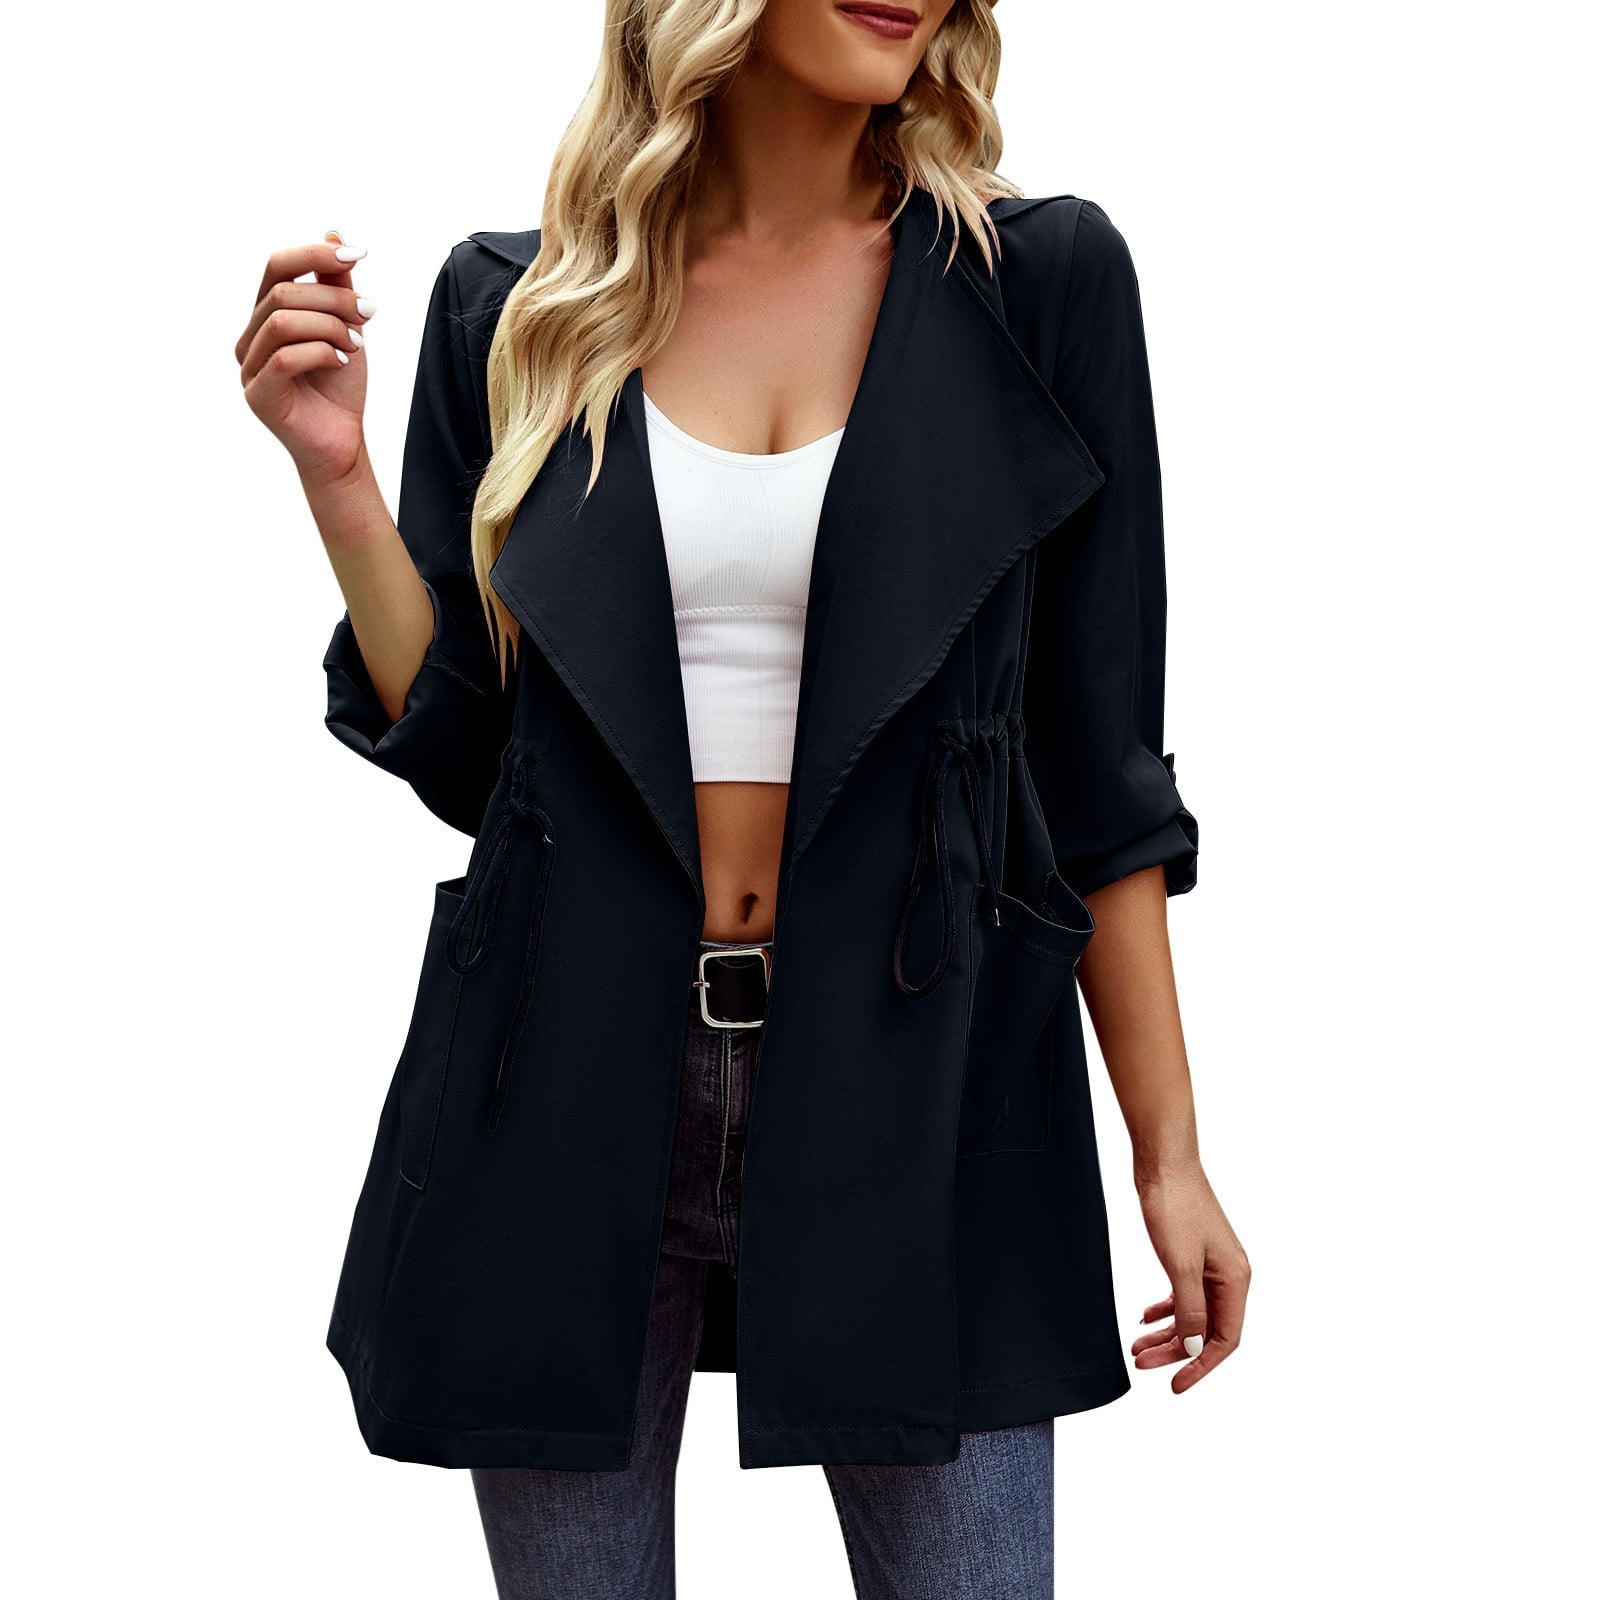  ZJHANHGKK fall 2023 womens fashion womens lightweight black  jacket clubwear jackets for women women's knitted sweaters black jeans  jacket business owner gifts for women : Clothing, Shoes & Jewelry